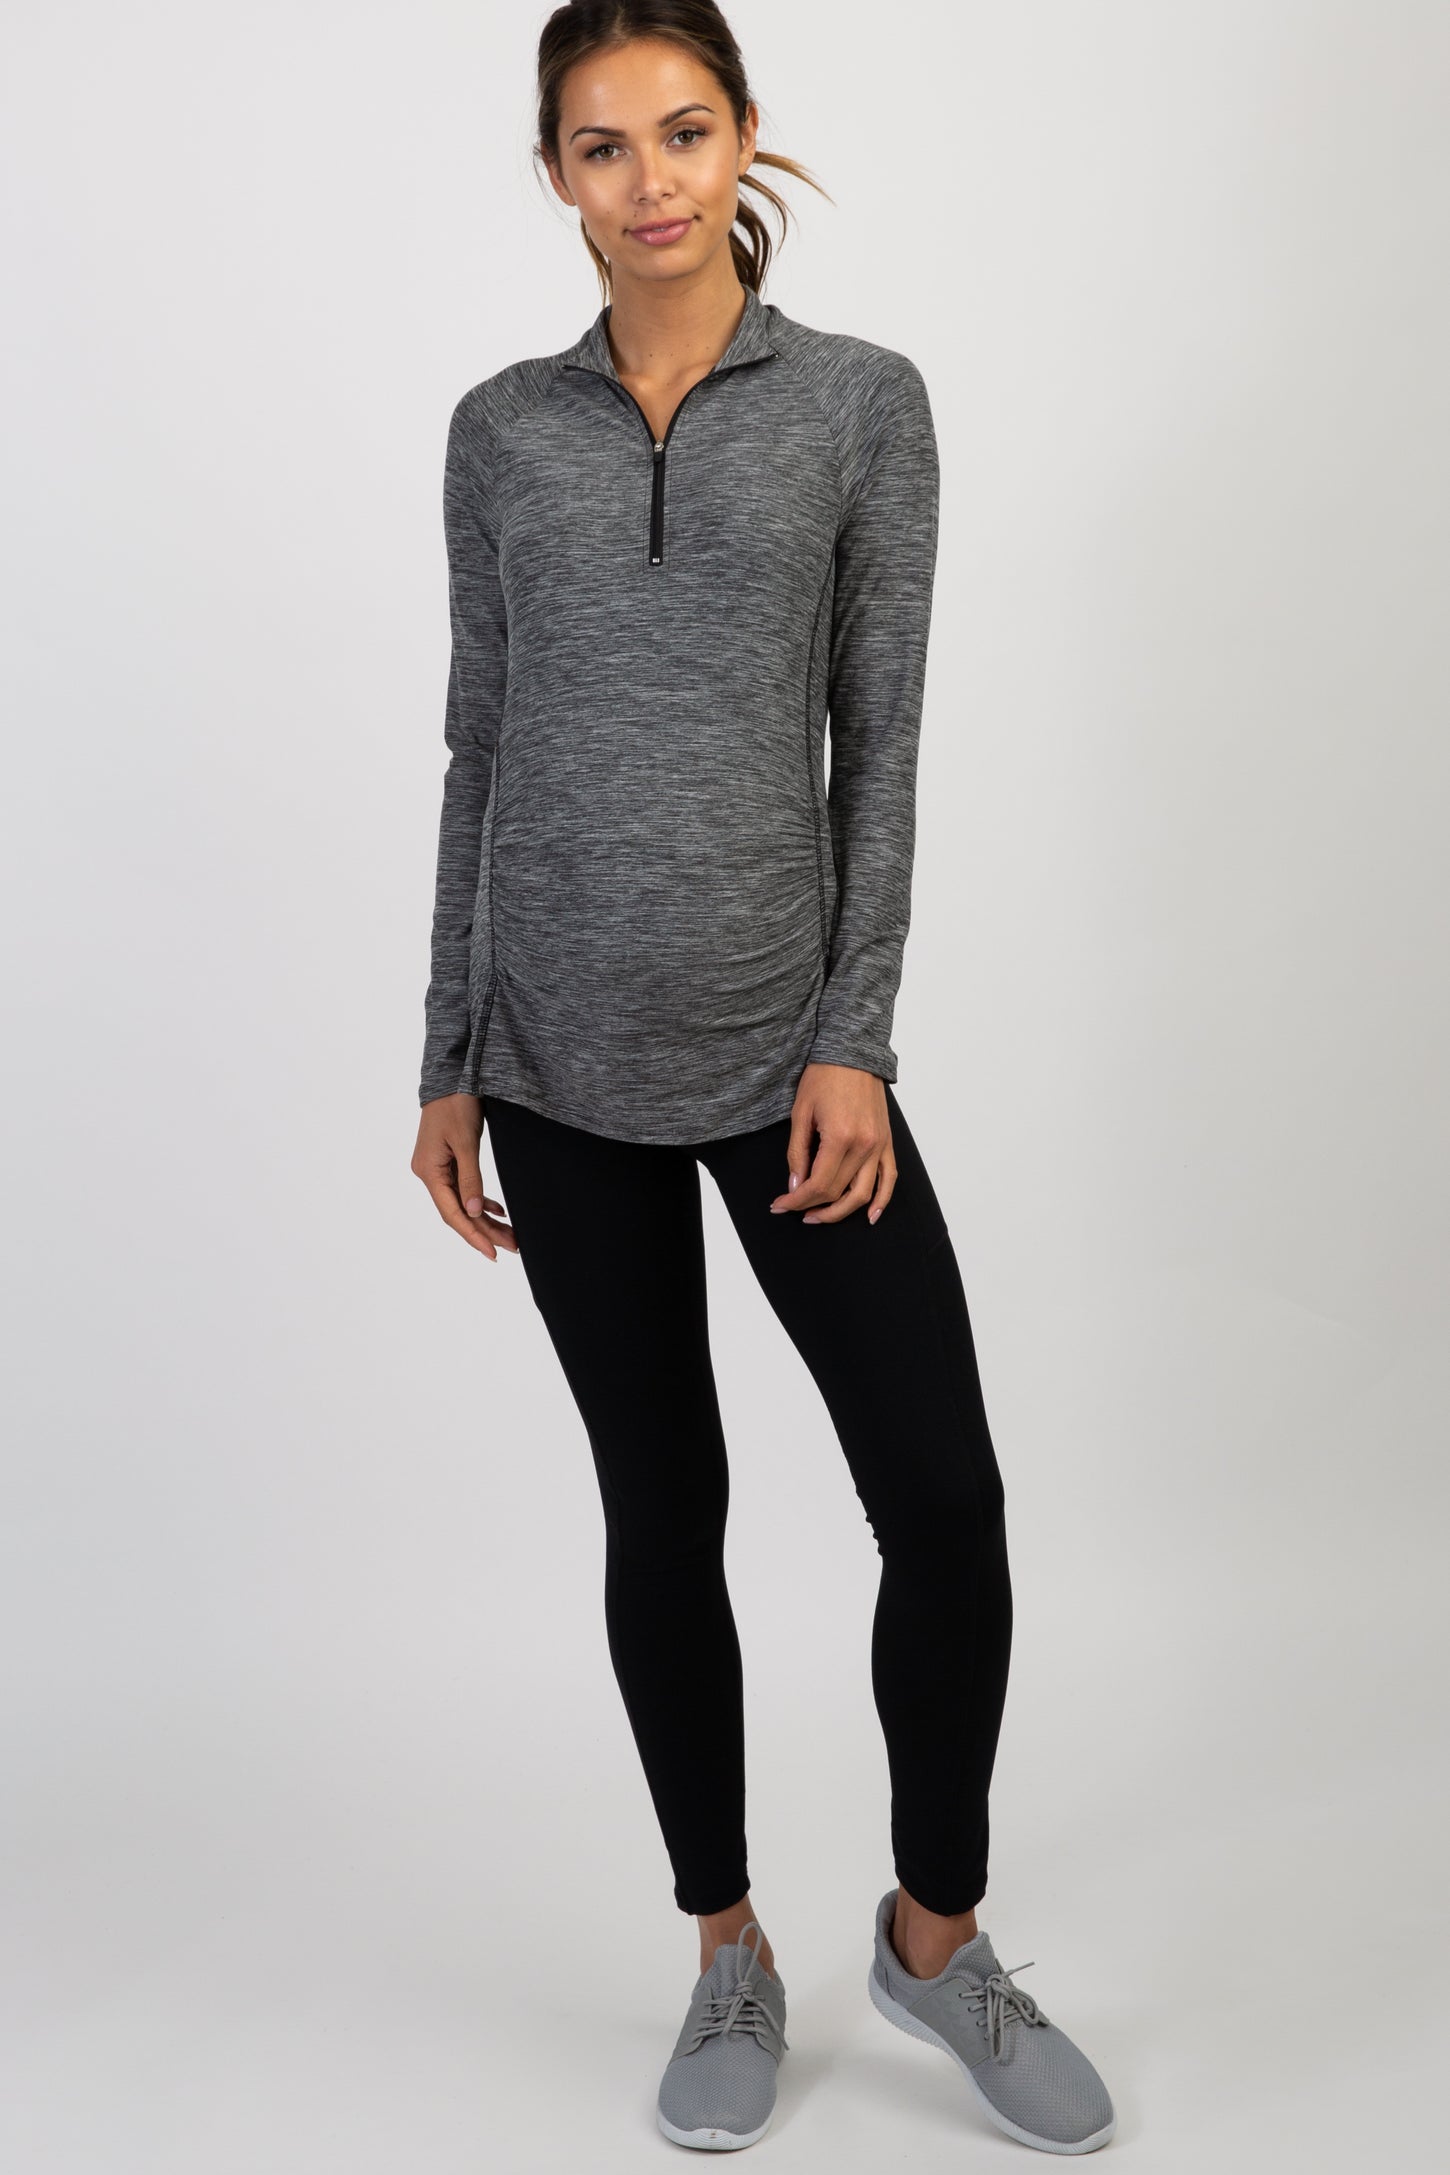 Charcoal Long Sleeve Ruched Maternity Active Top